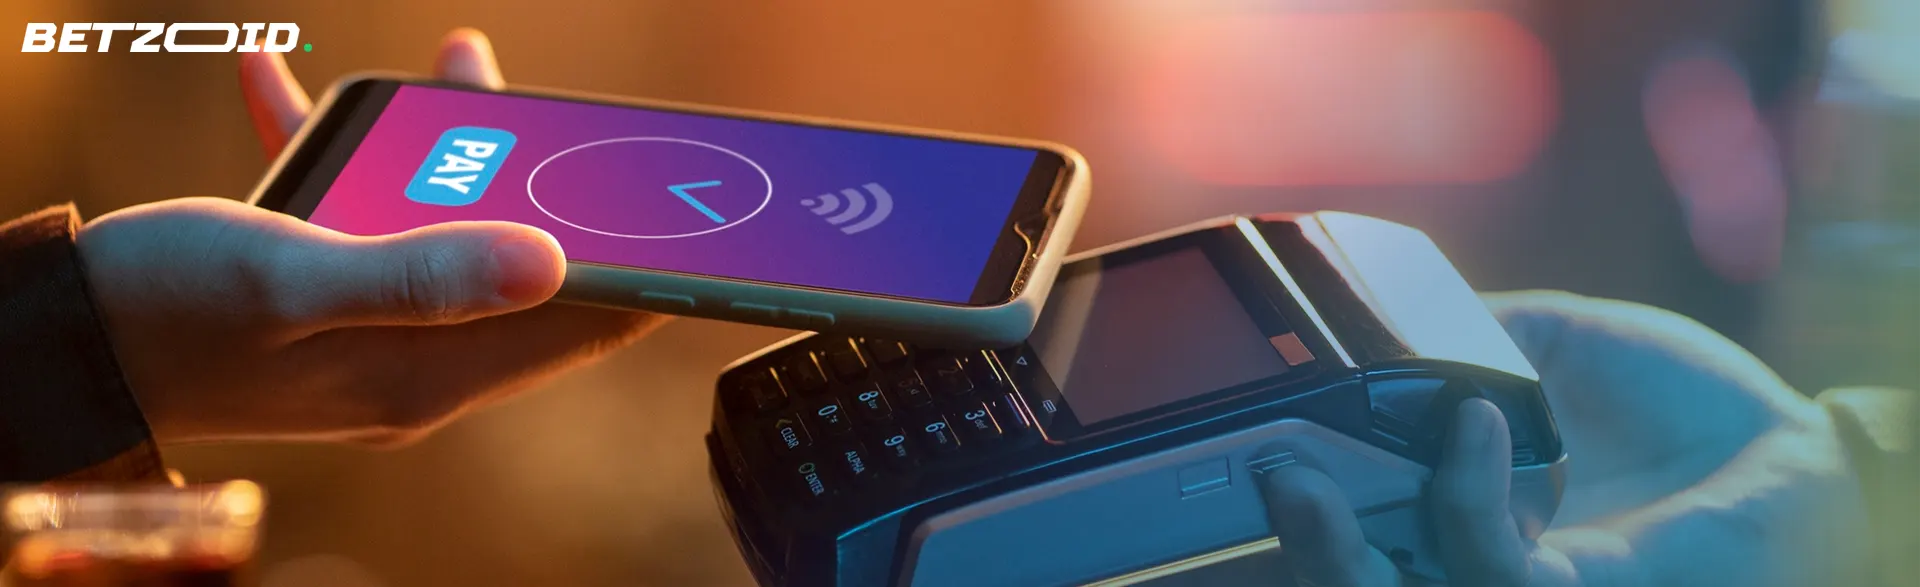 A smartphone completing a transaction over a payment terminal, illustrating pay by phone casinos.